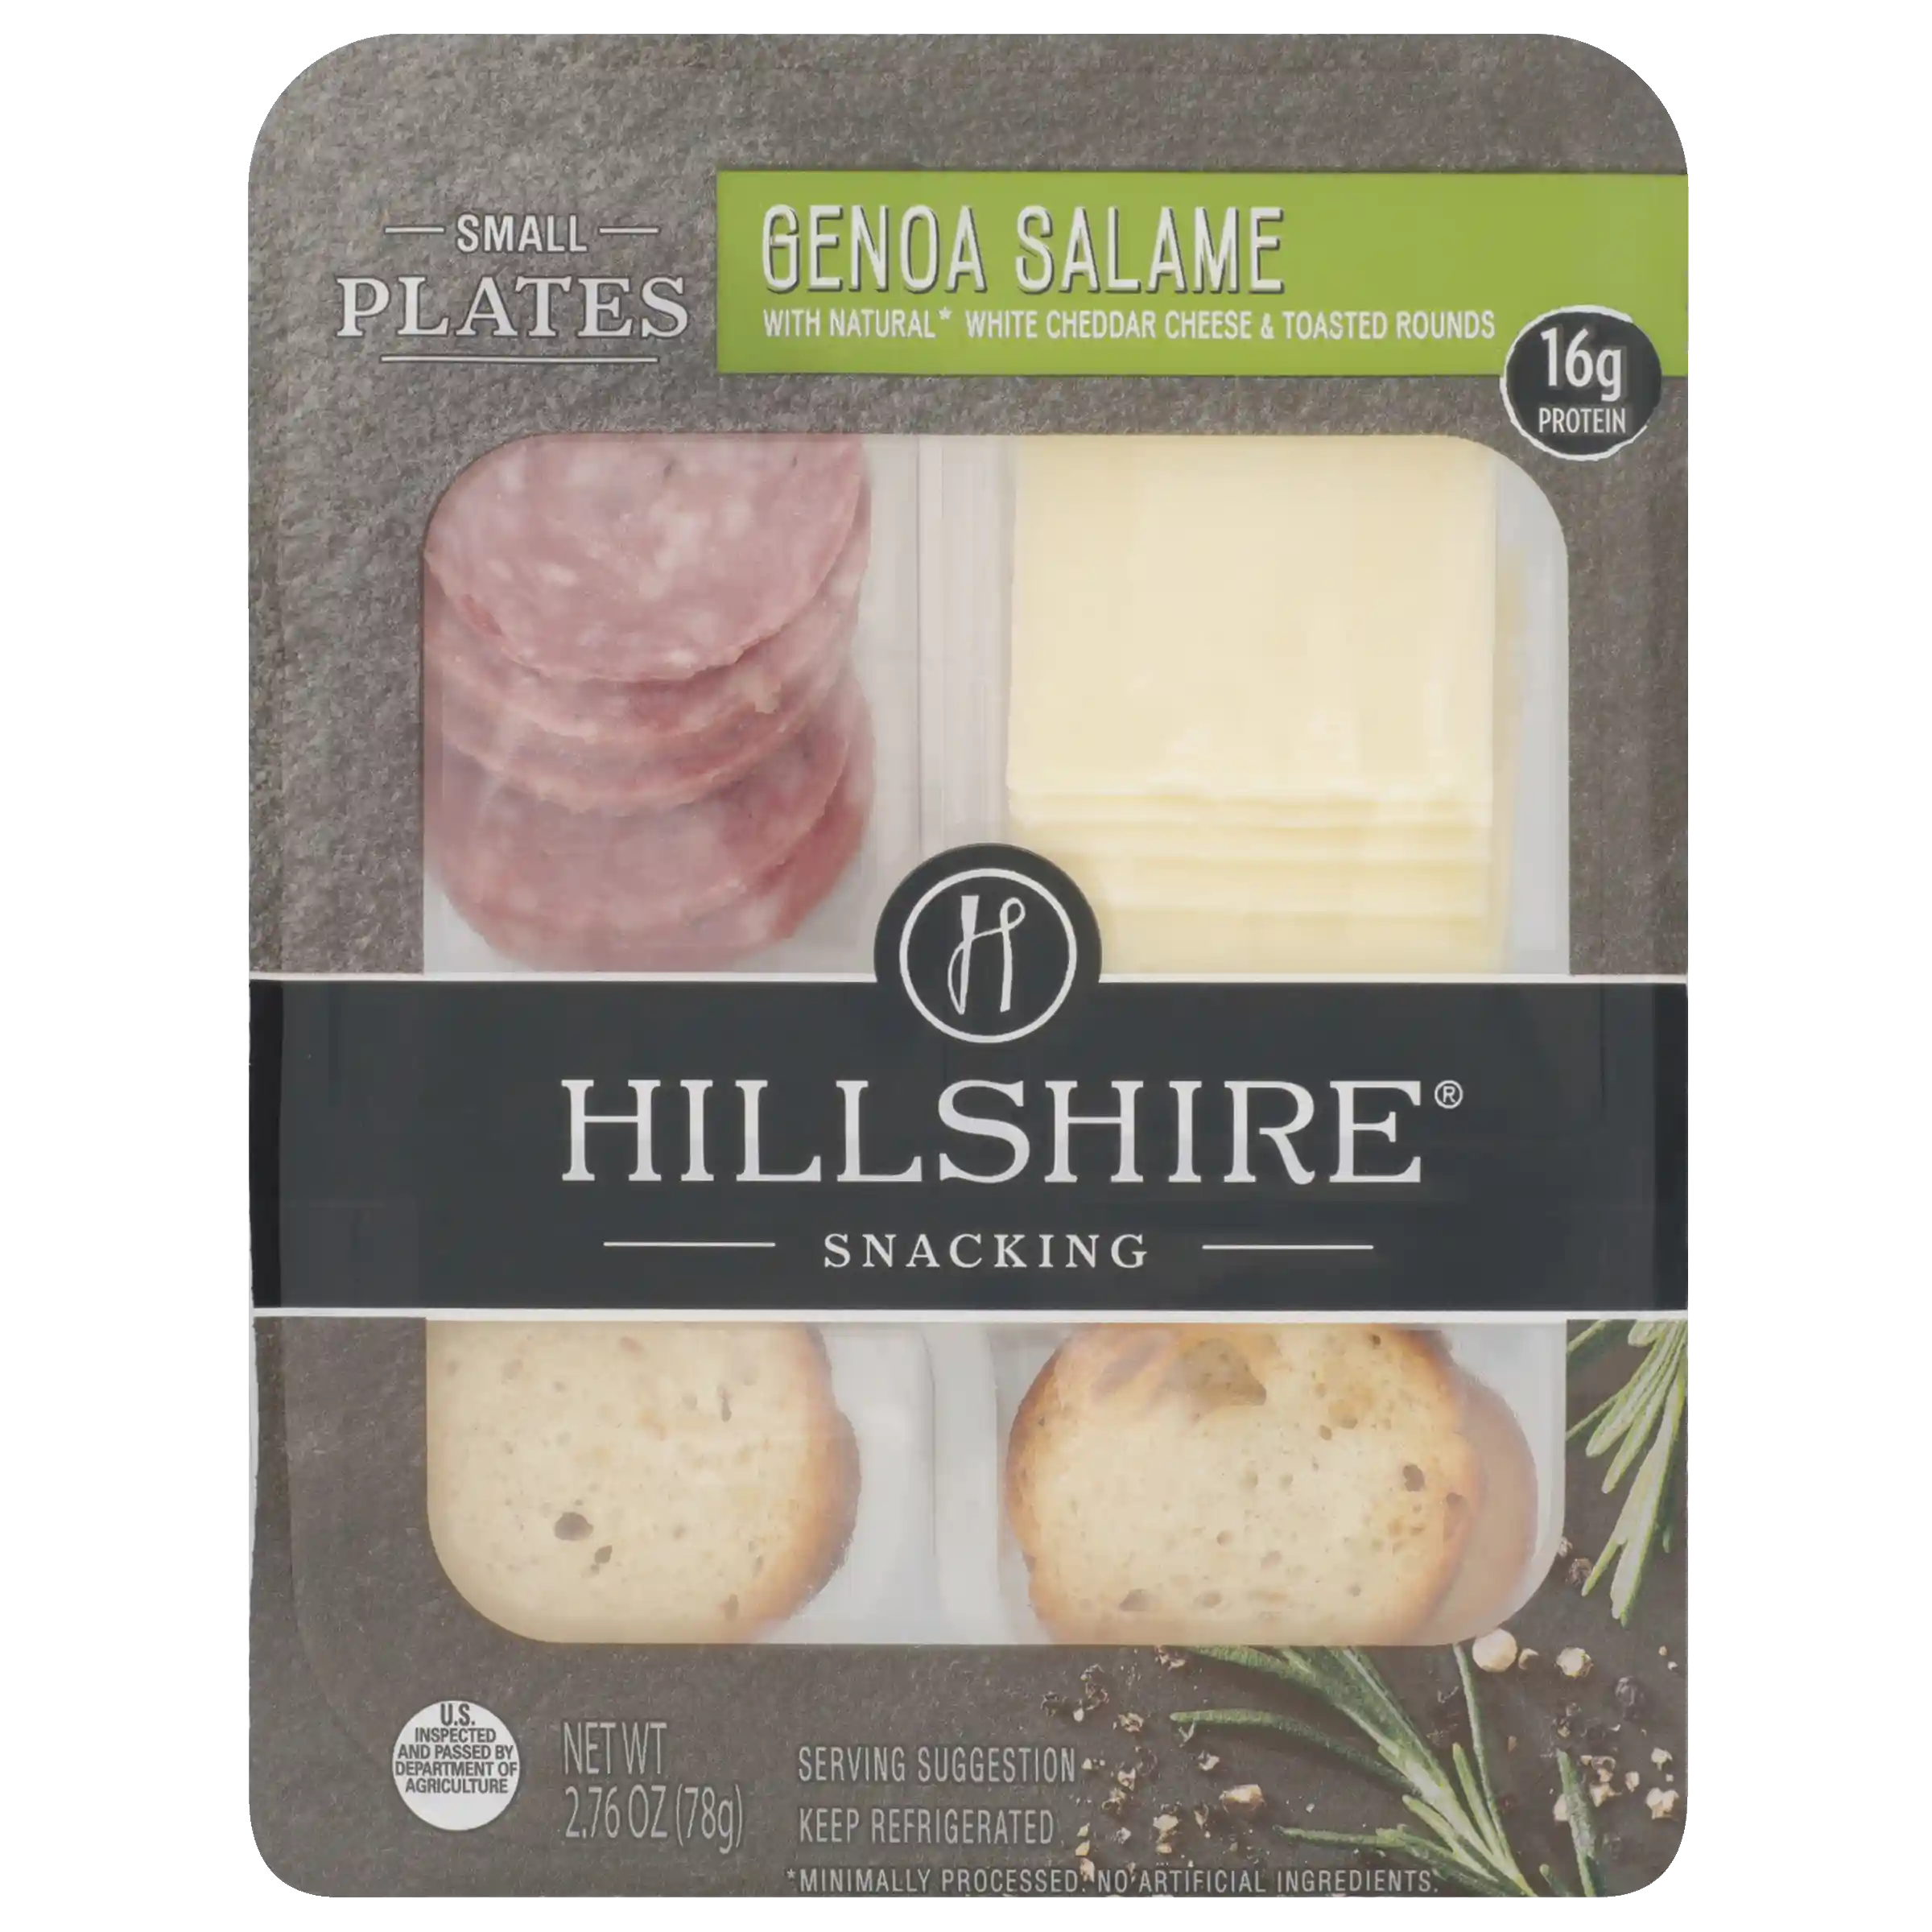 Hillshire® Snacking Small Plates, Genoa Salami Deli Lunch Meat and White Cheddar Cheese, 2.76 oz_image_11